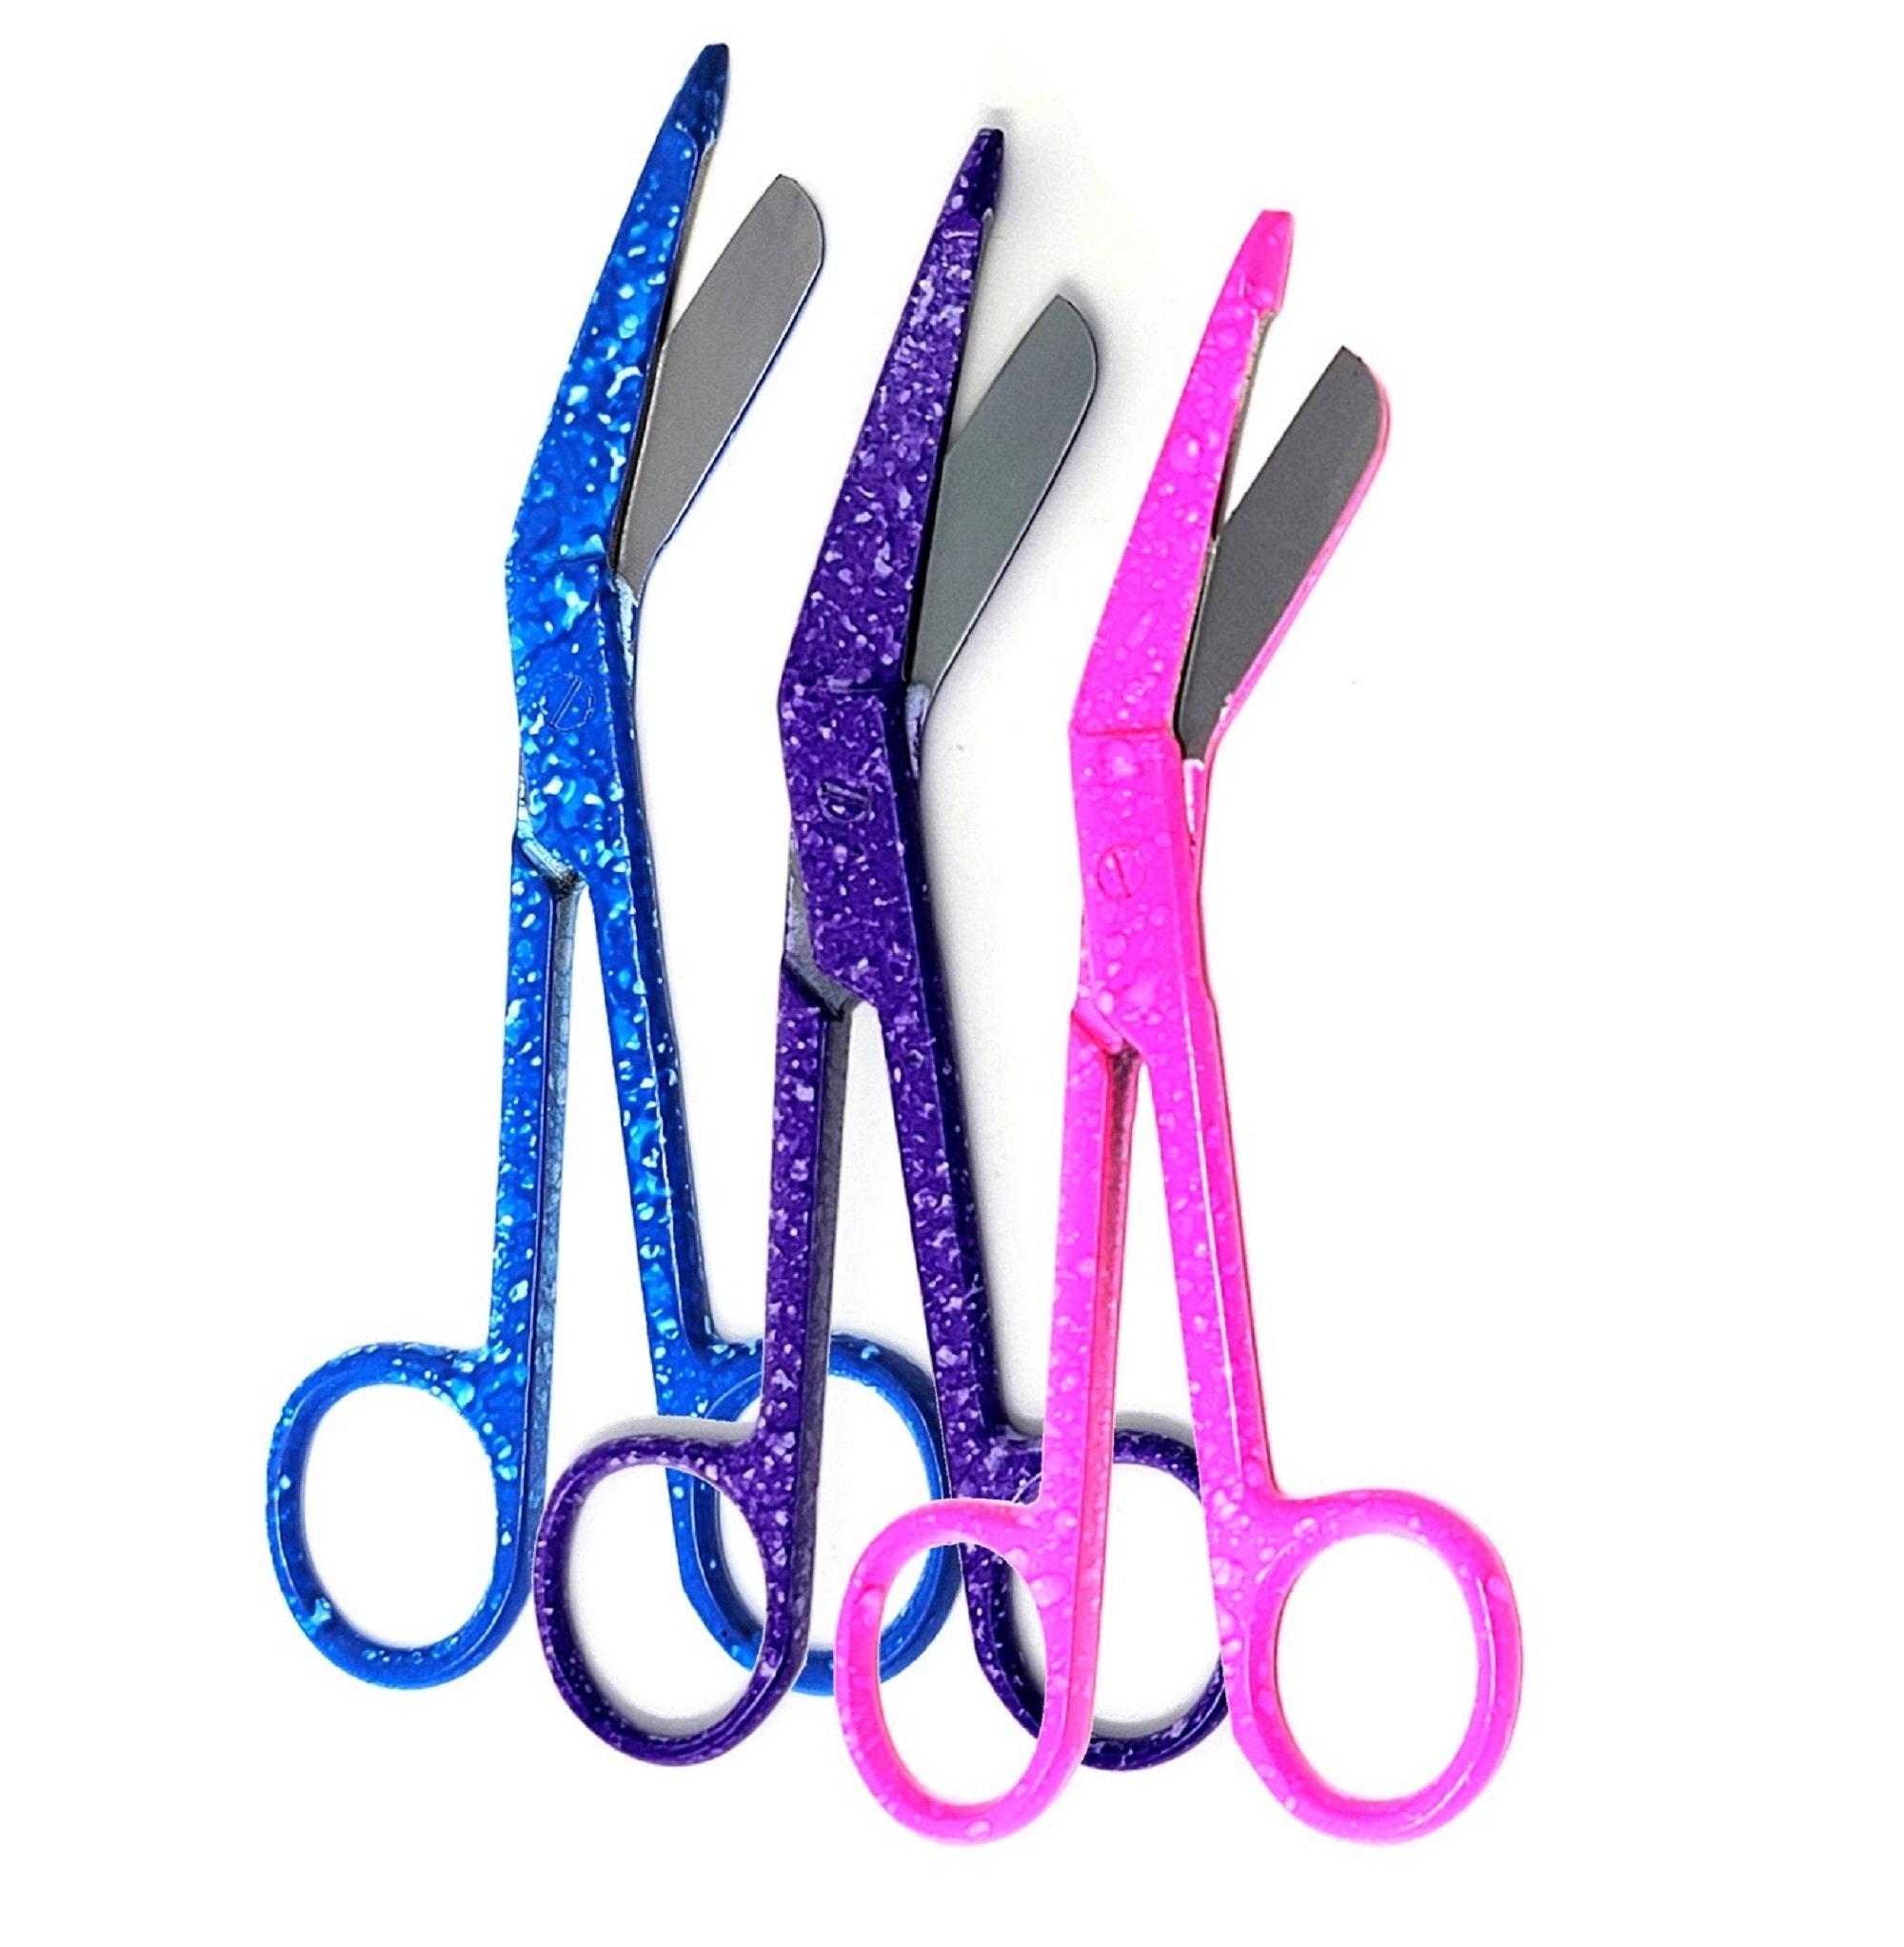 Live, Love, Heal Bandage/Utility Scissors with Carabiner